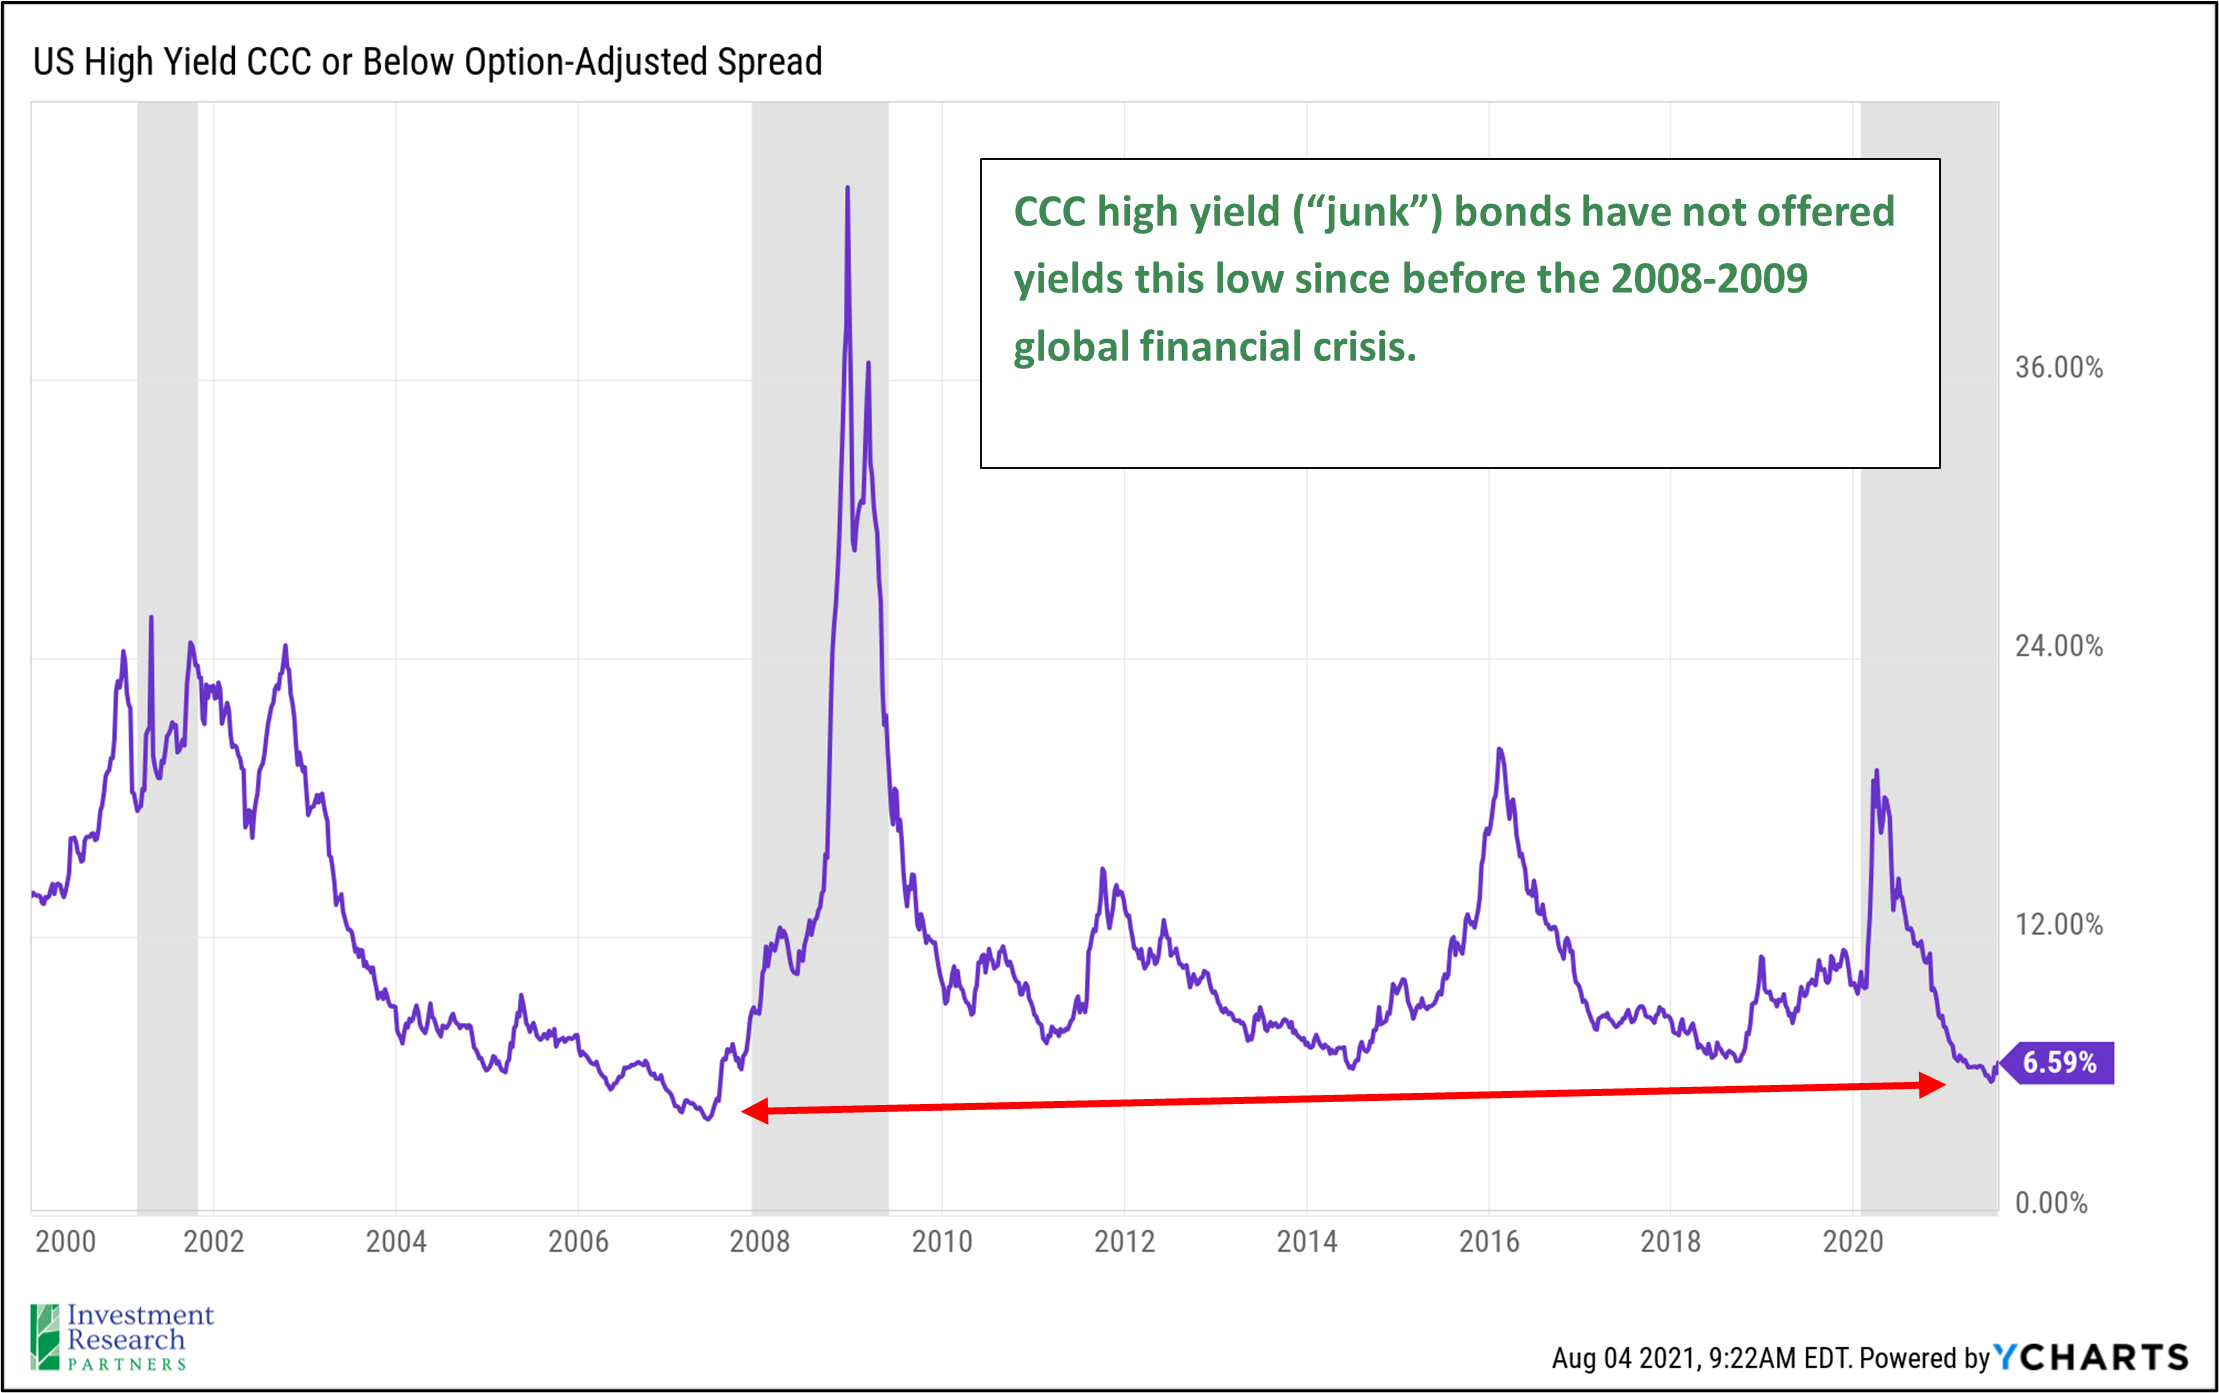 Line graph depicting US High Yield CCC or Below Option-Adjusted Spread from 2000 to 2021 with note: CCC high yield (